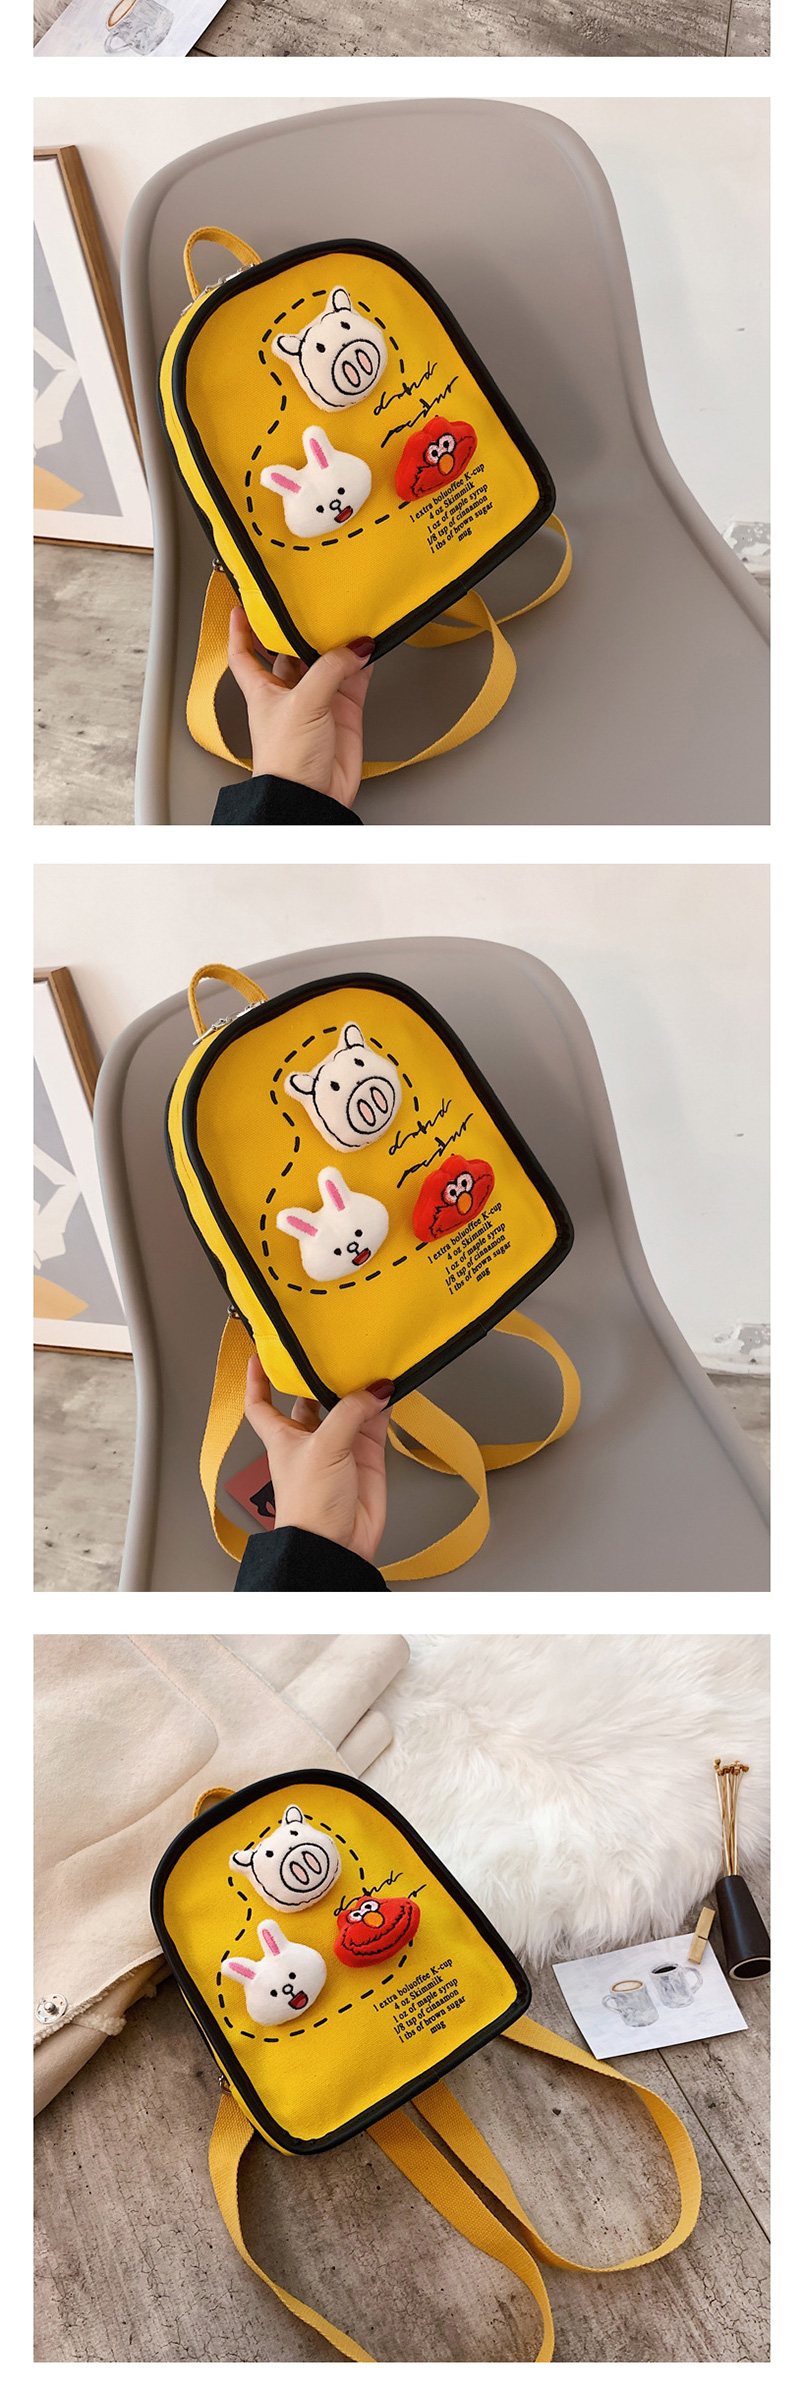 Fashion Red Graffiti Canvas Cartoon Letter Print Backpack,Backpack